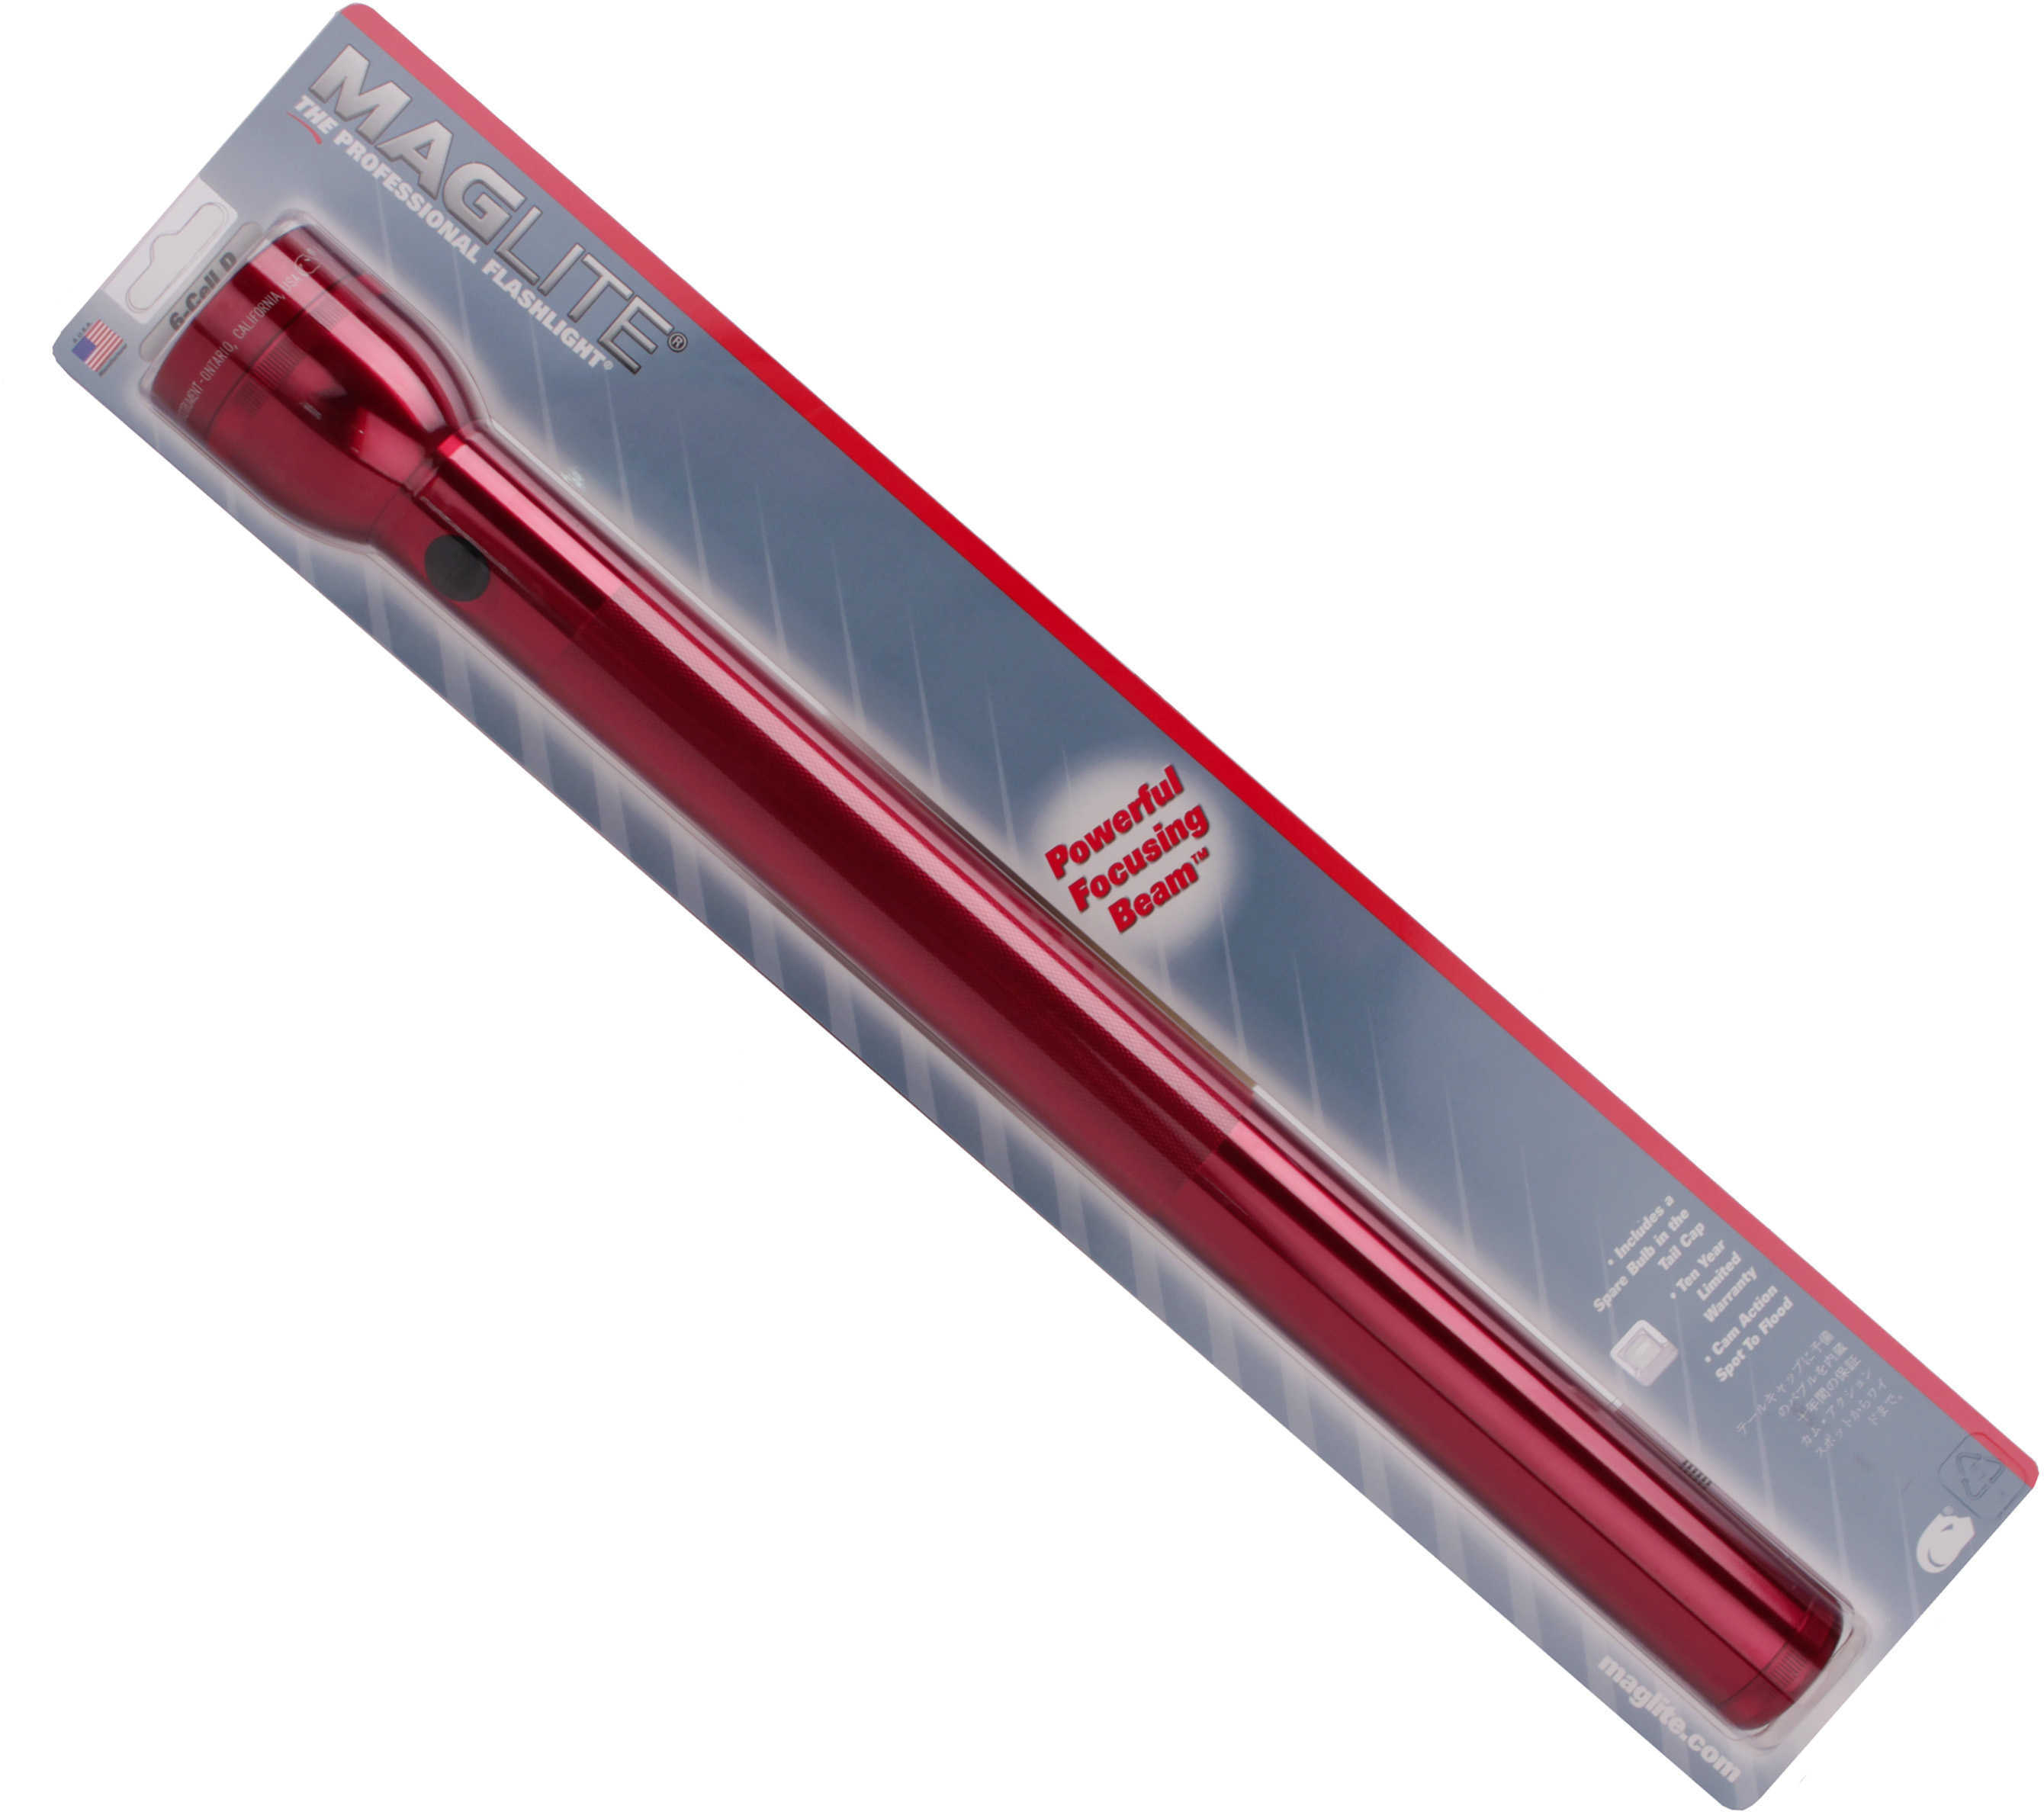 Maglite 6 Cell D Flashlight (Red) S6D036